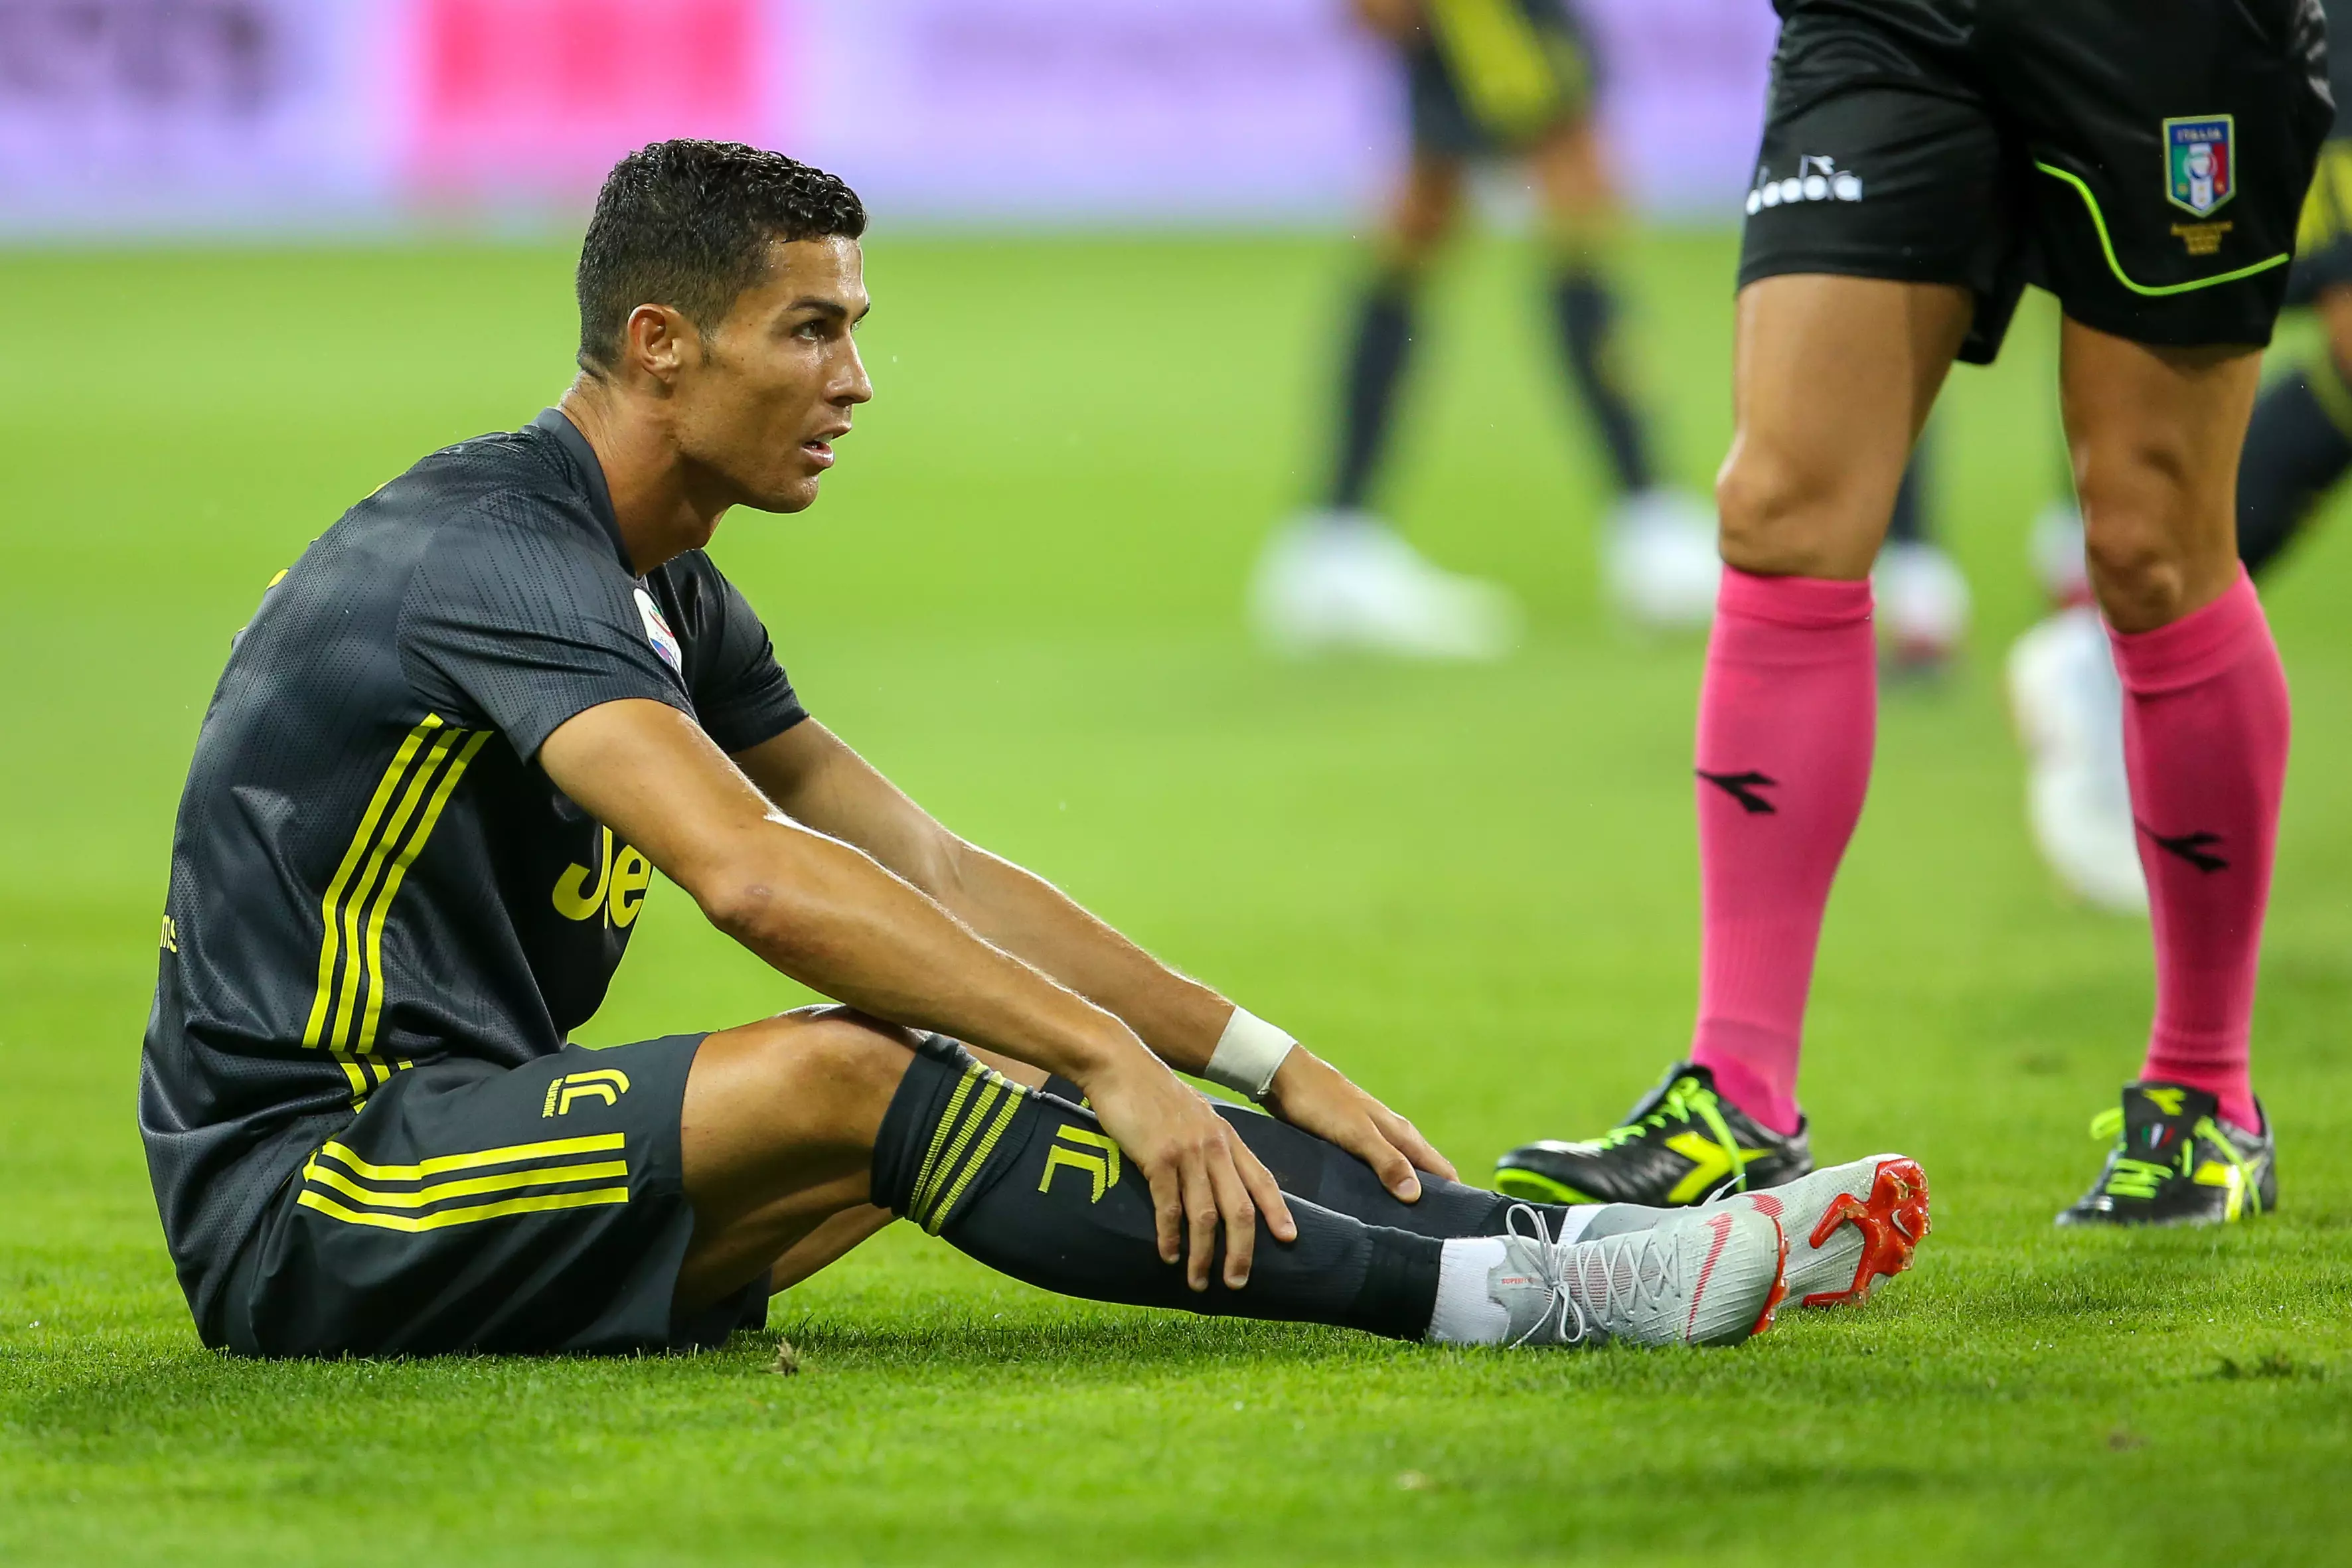 Ronaldo during Juve's game with Parma. Image: PA Images